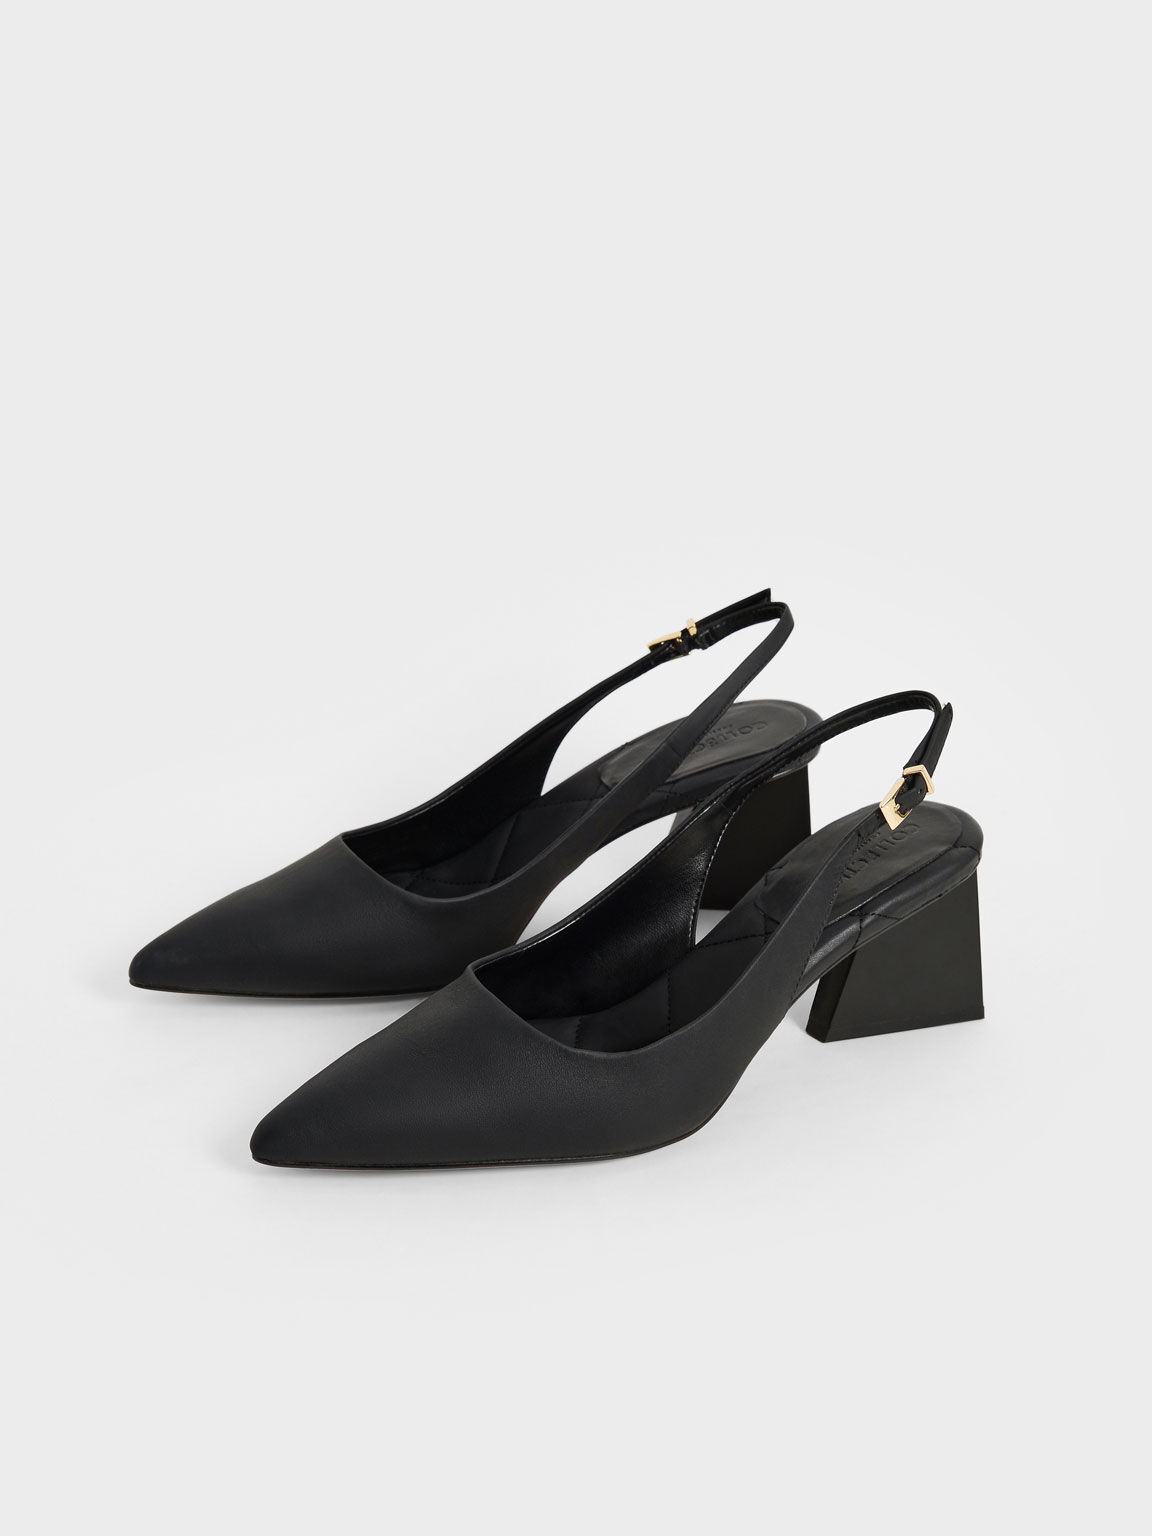 Black Leather Pointed Toe Slingback Pumps - CHARLES & KEITH QA